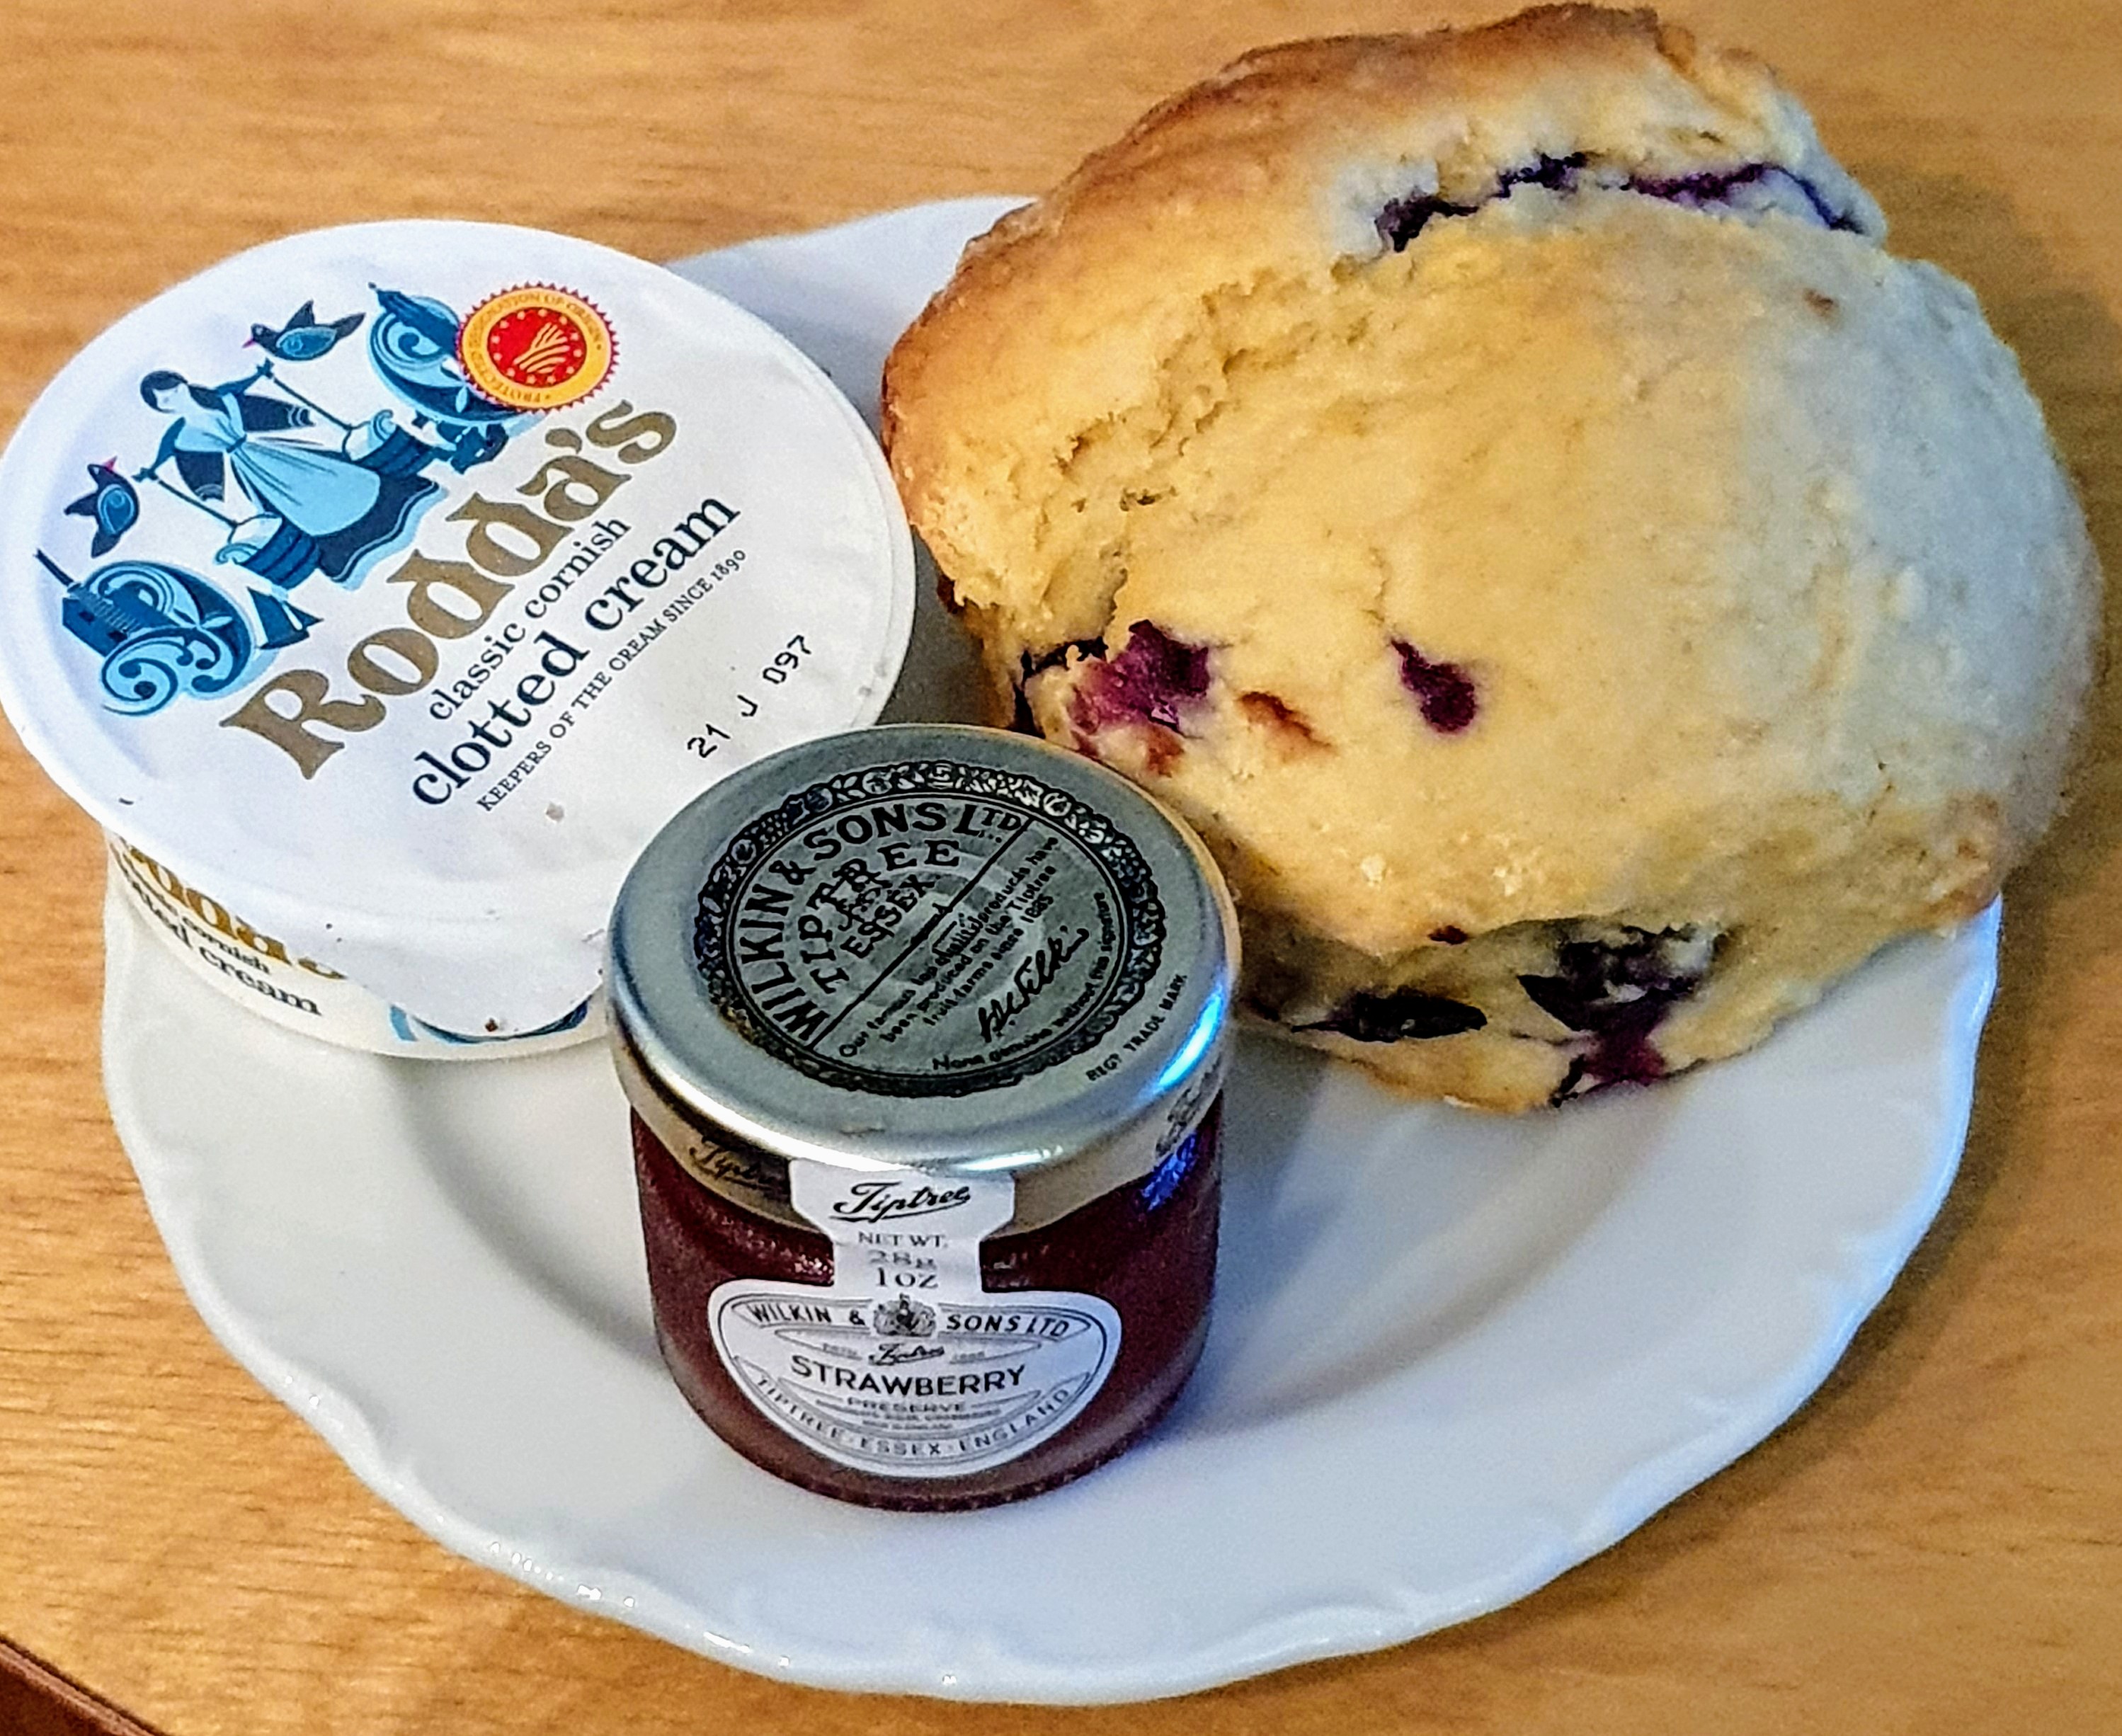 Blueberry scone with Cornish clotted cream and strawberry jam, Dolly Birds Mobile Catering, Staffordshire